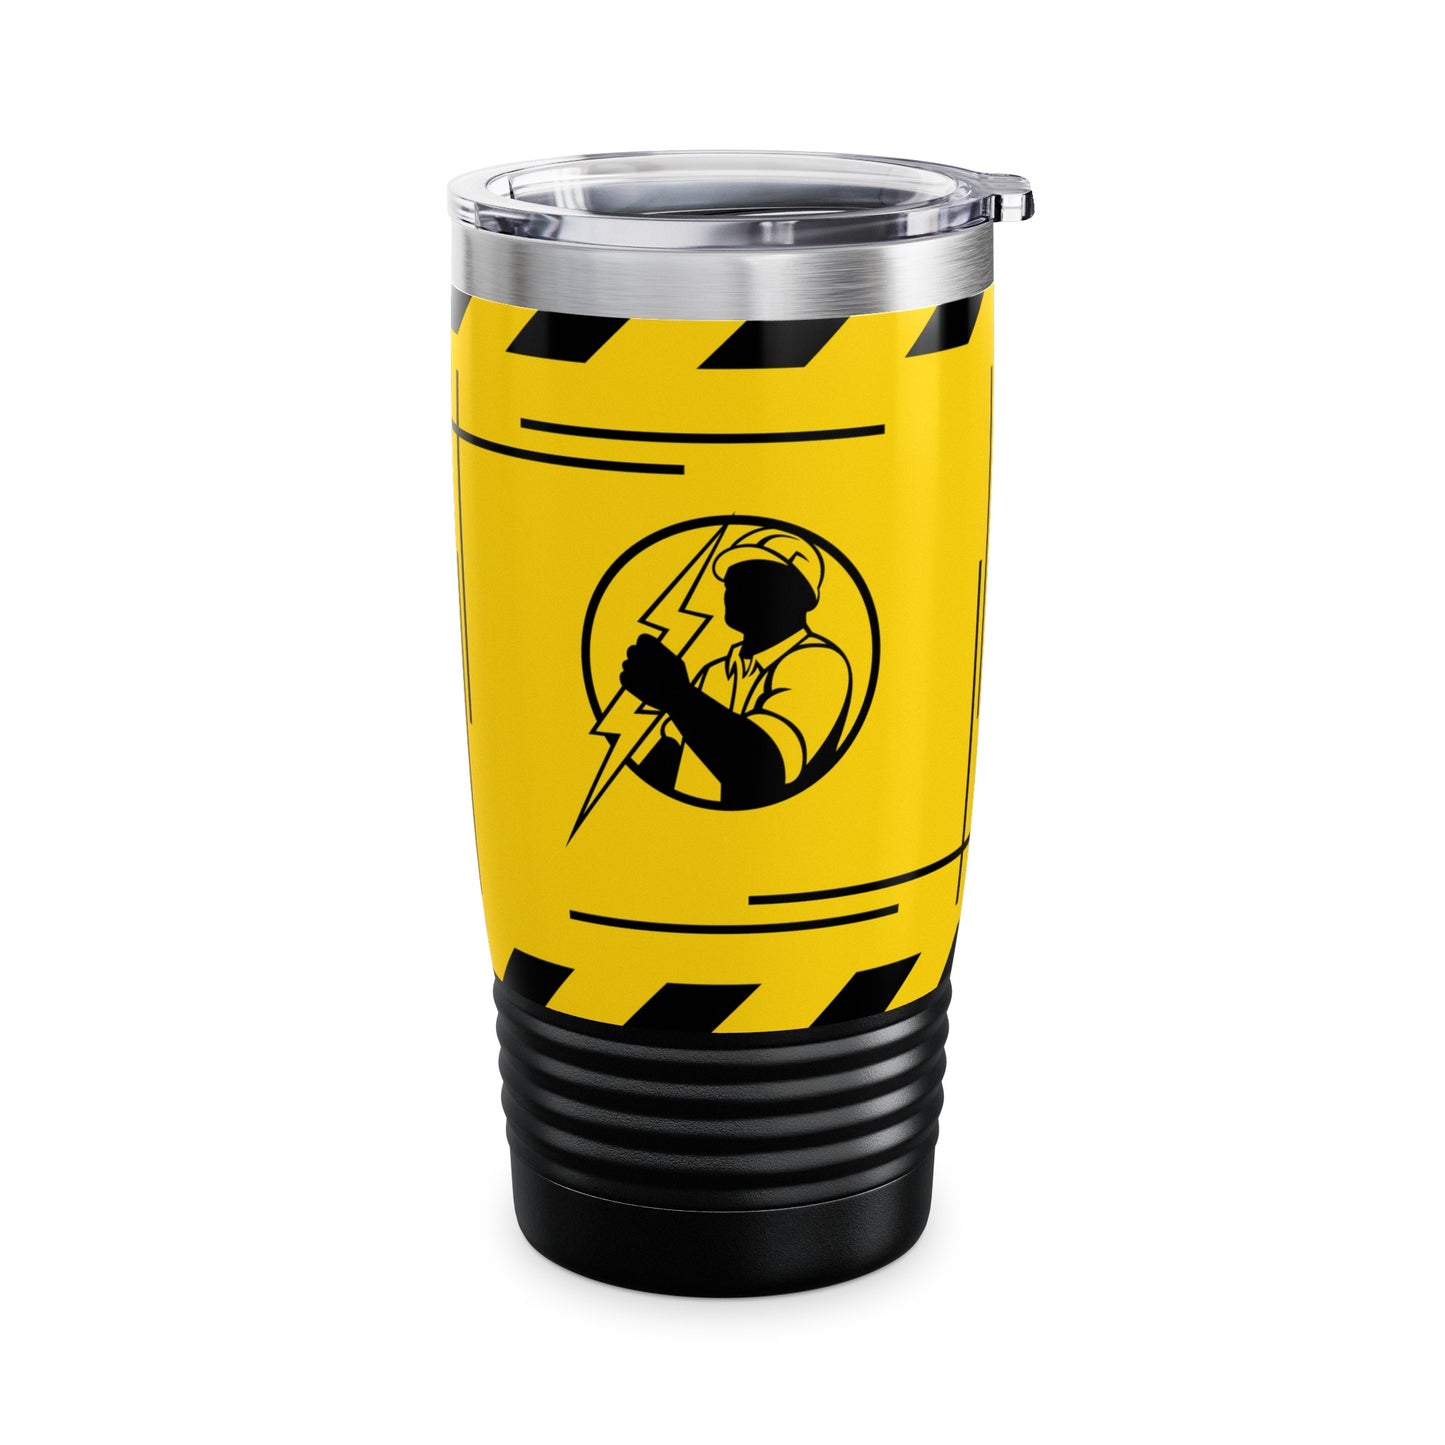 Relax, I'm A Union Electrician, And I Know Things - Ringneck Tumbler, 20oz